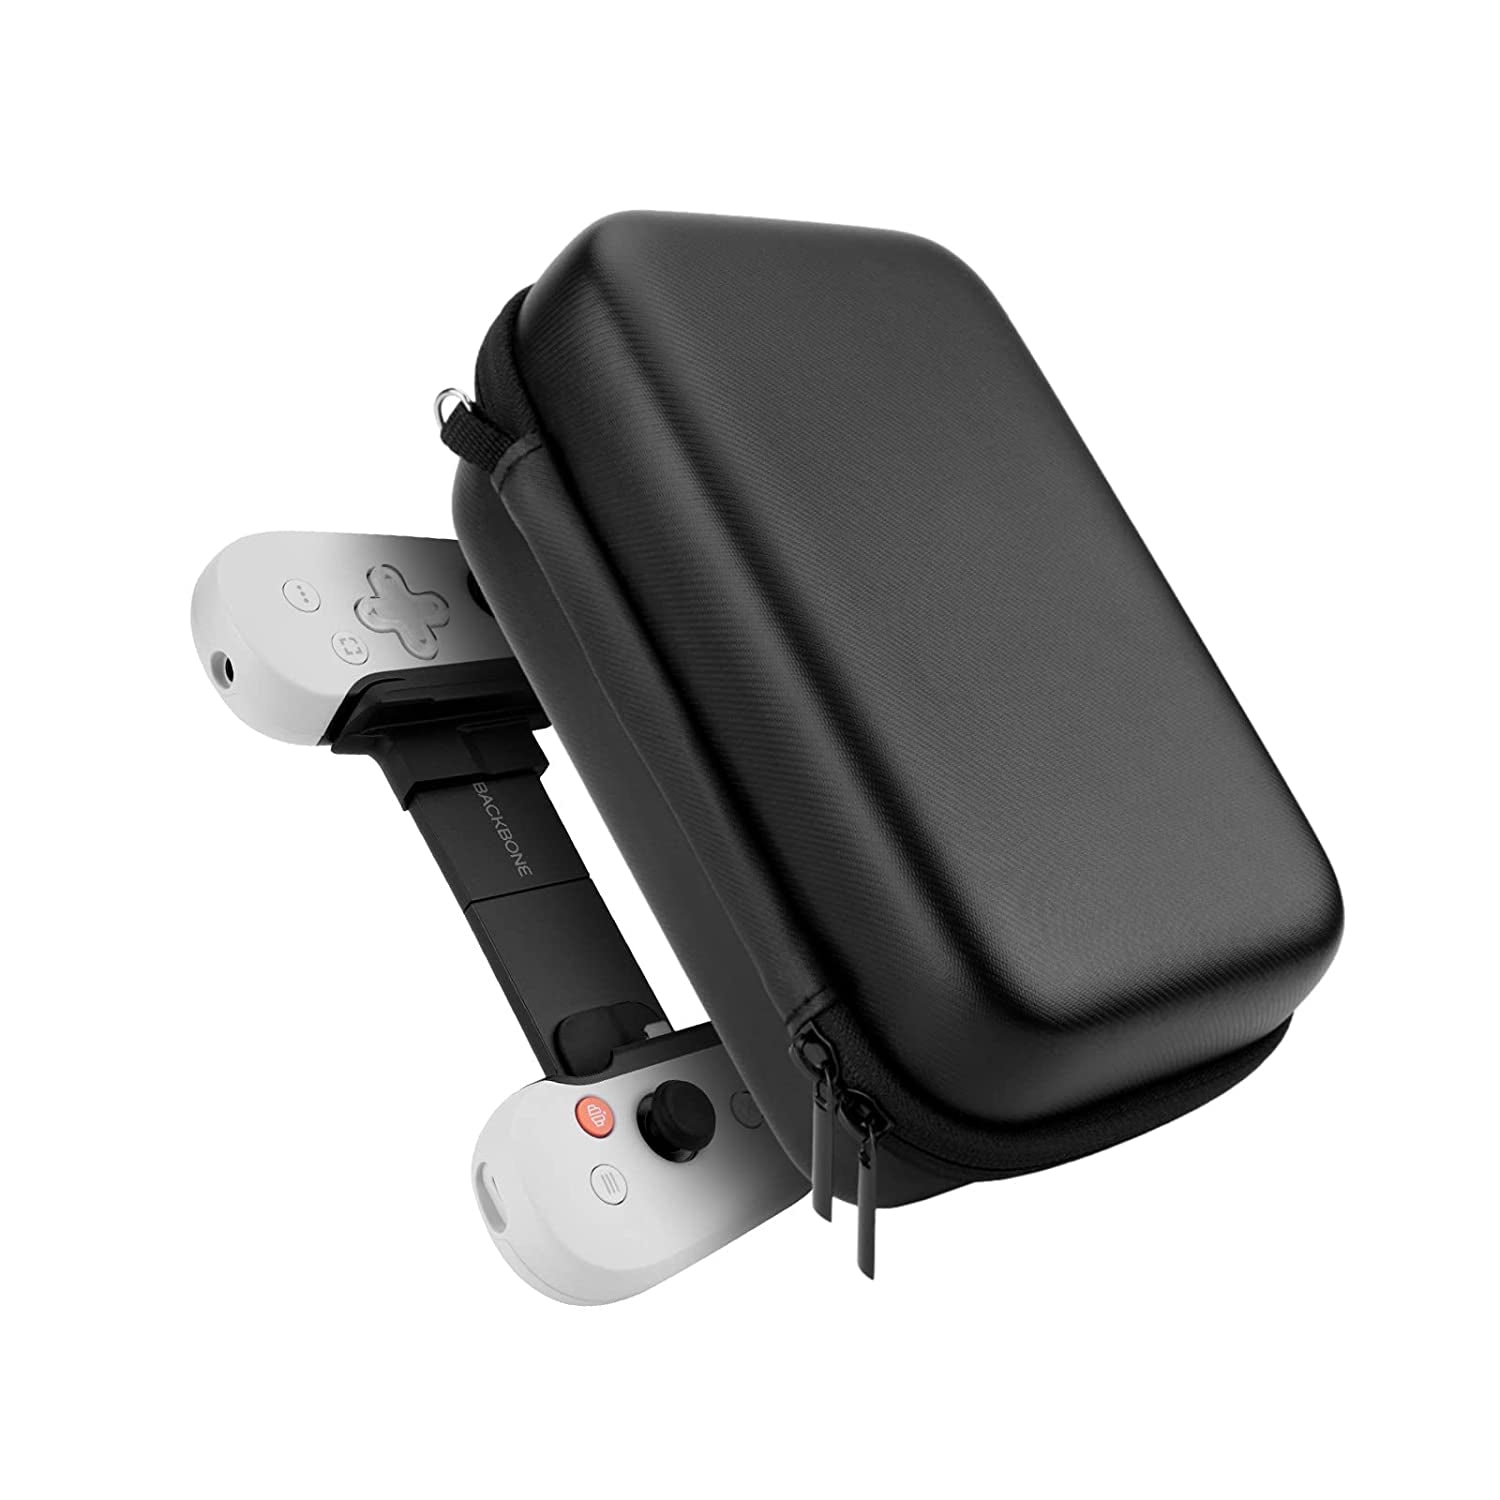 Carrying Case Compatible with Backbone Controller for Iphone